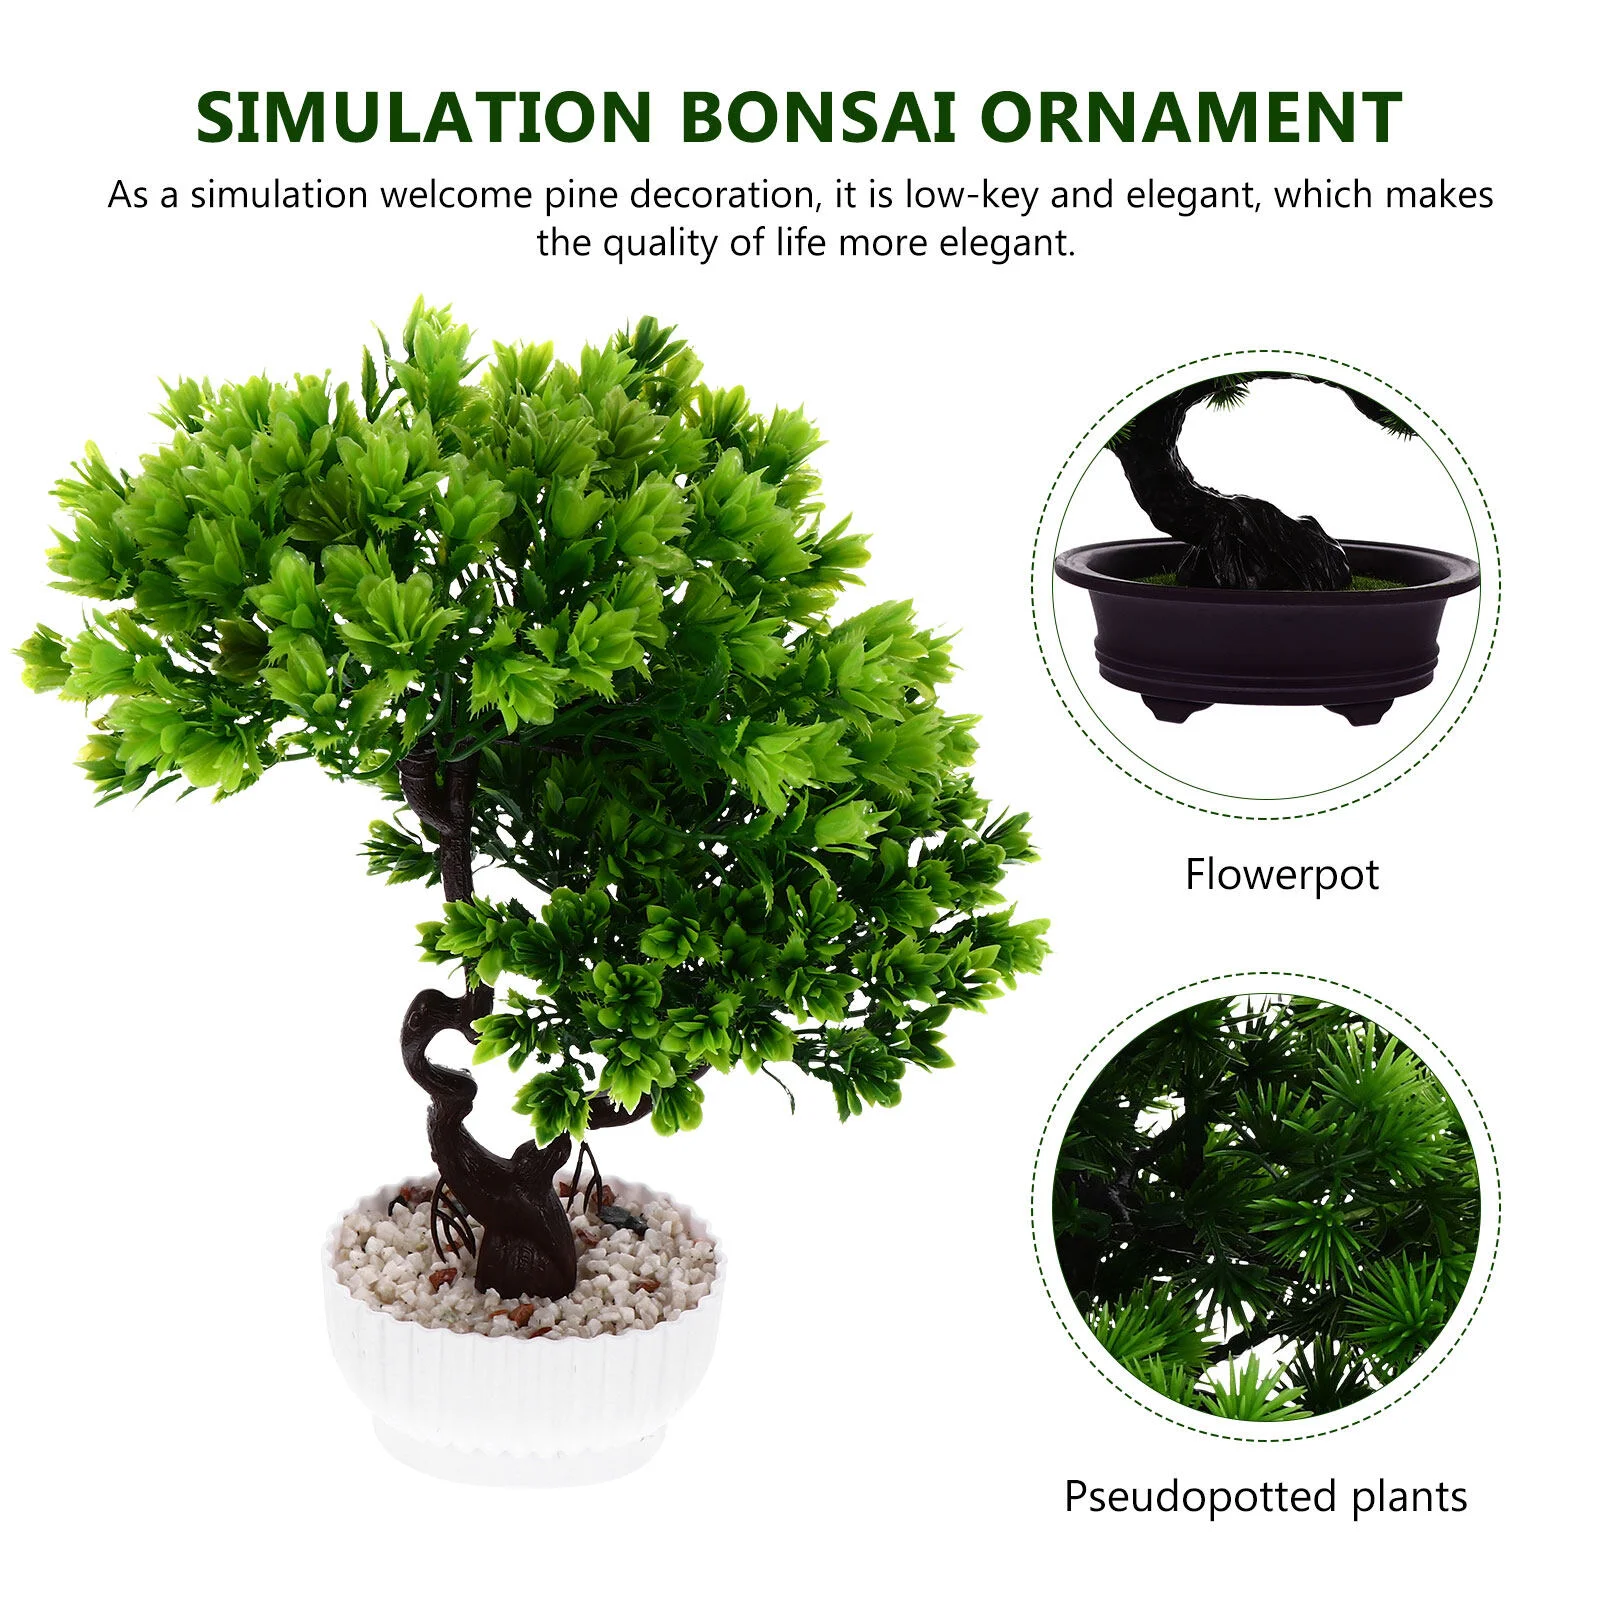 

Welcoming Pine Ornaments Simulation Bonsai Faux Greenery Succulent Plants Welcome Decor Fake Decors Artificial Plastic Office